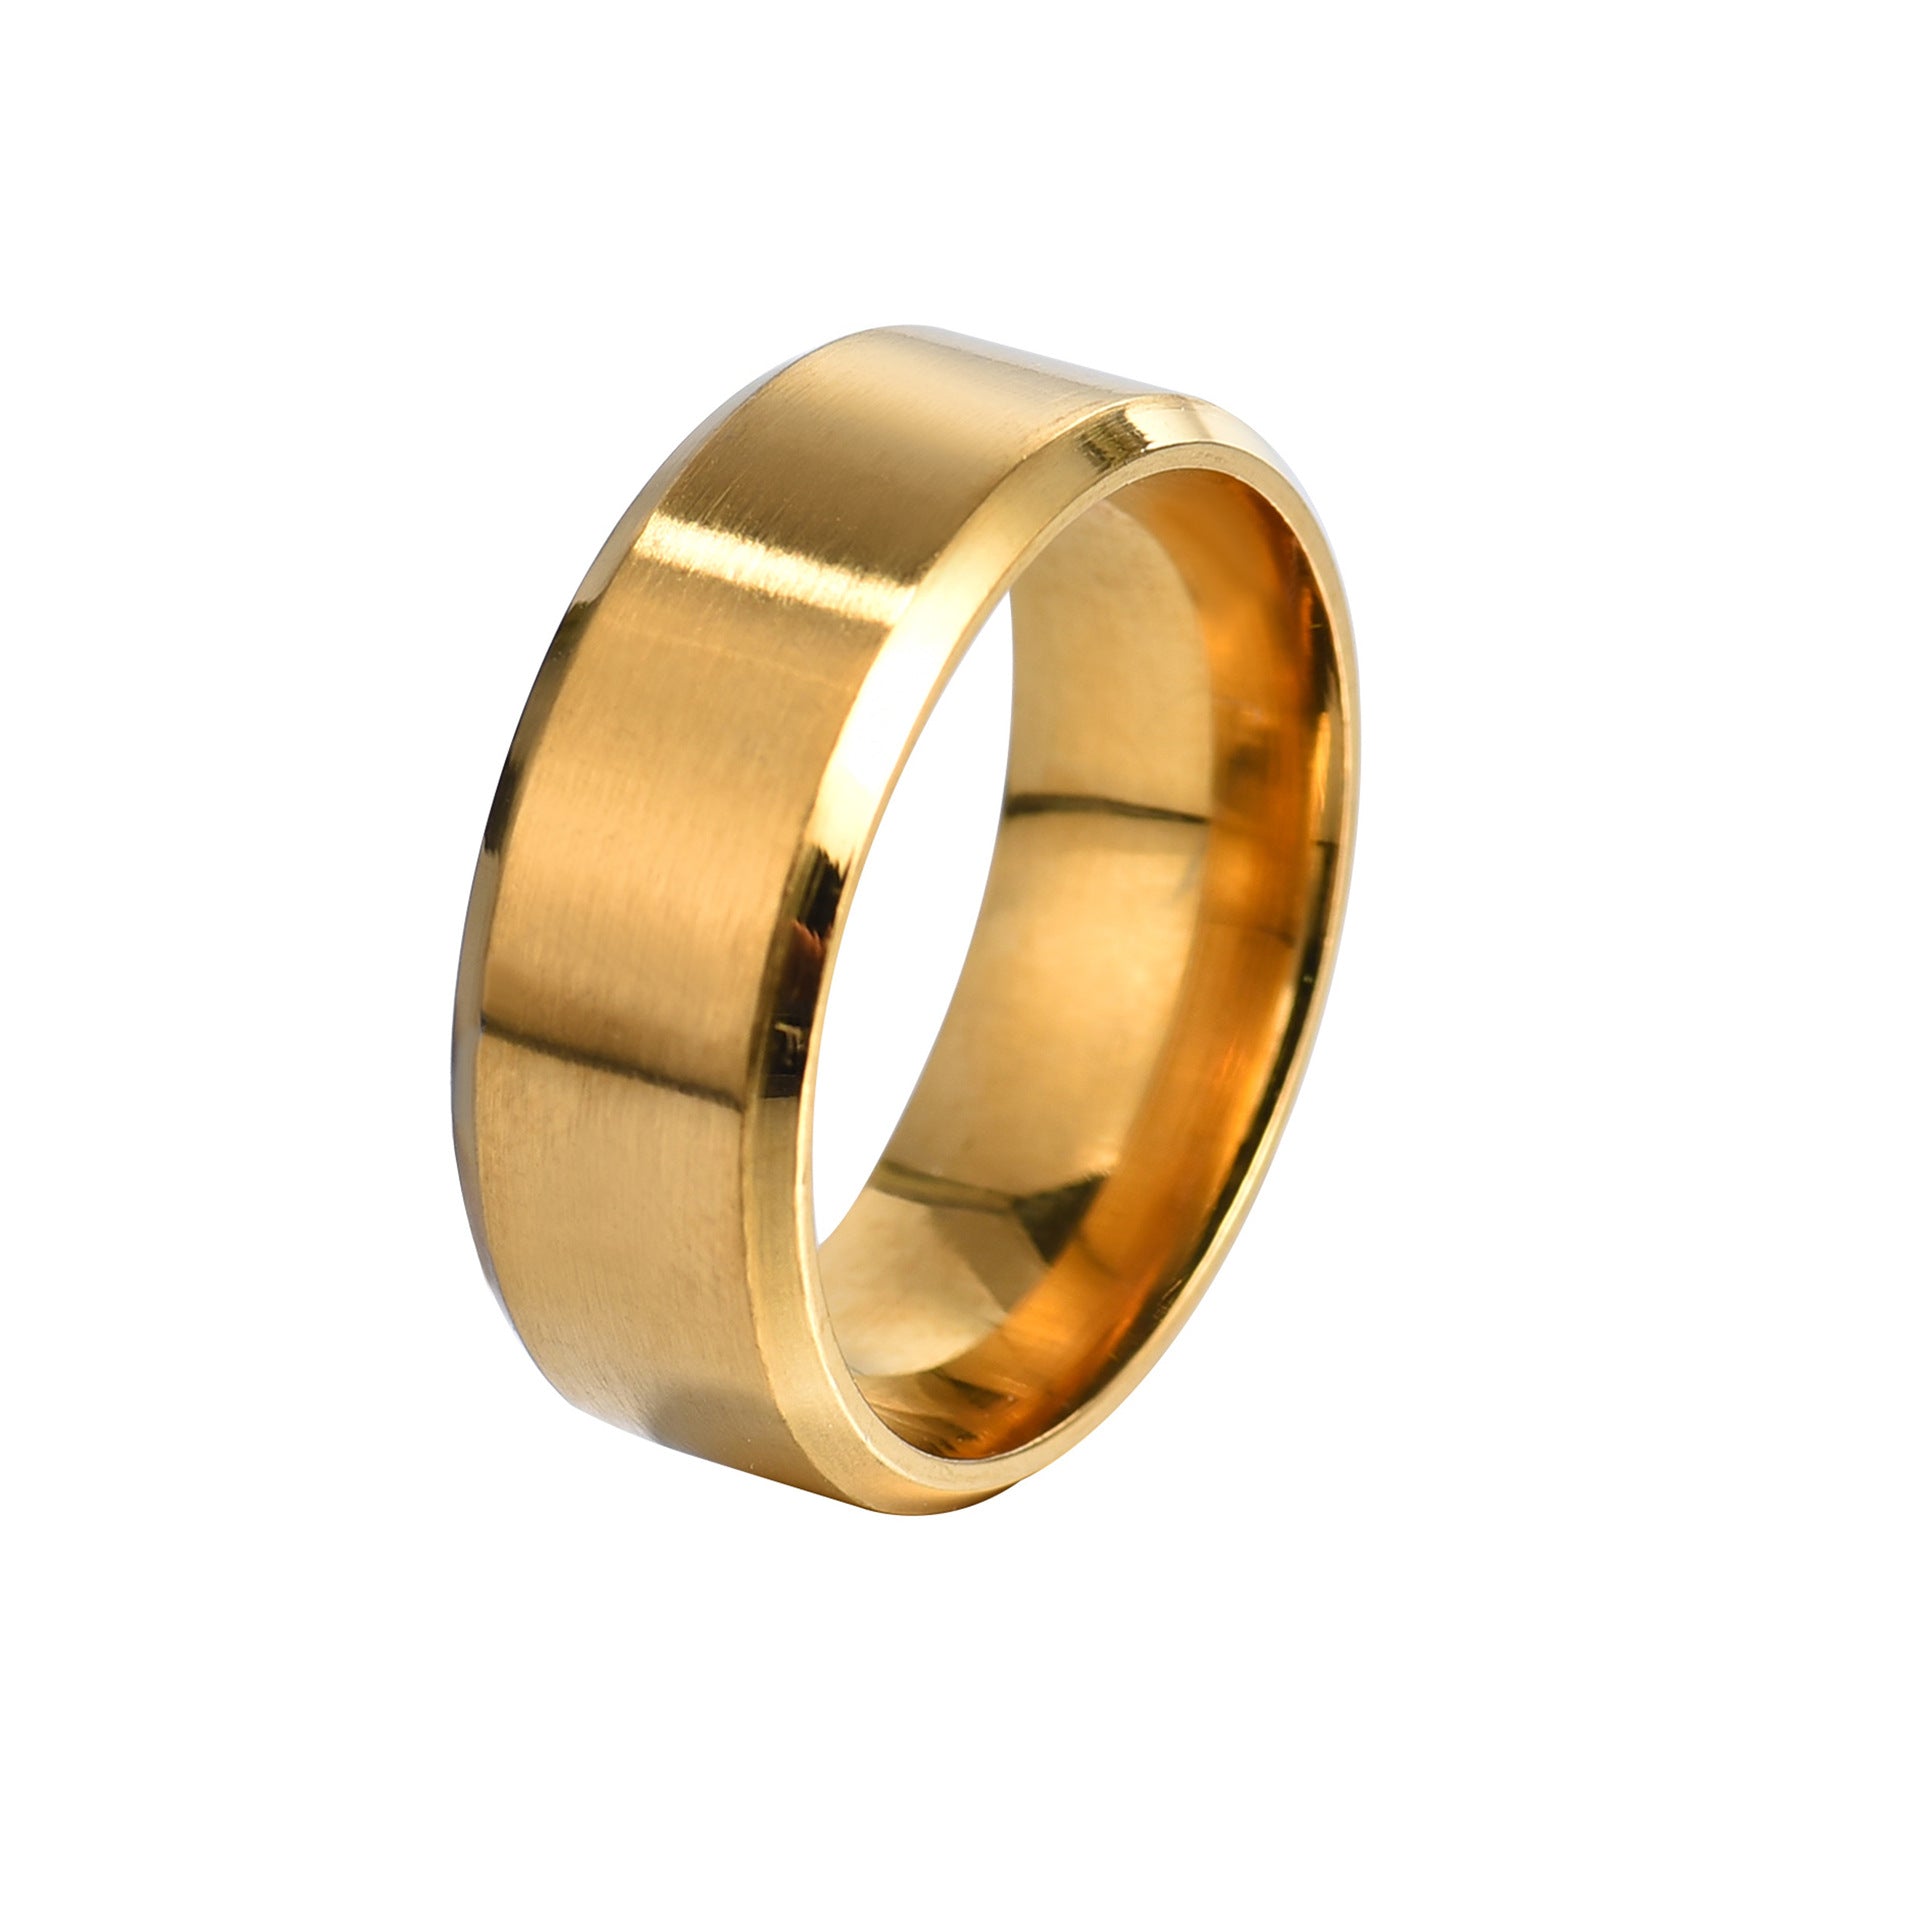 Gold Colored 316L Quality Steel Ring Wedding Ring (15 Size)